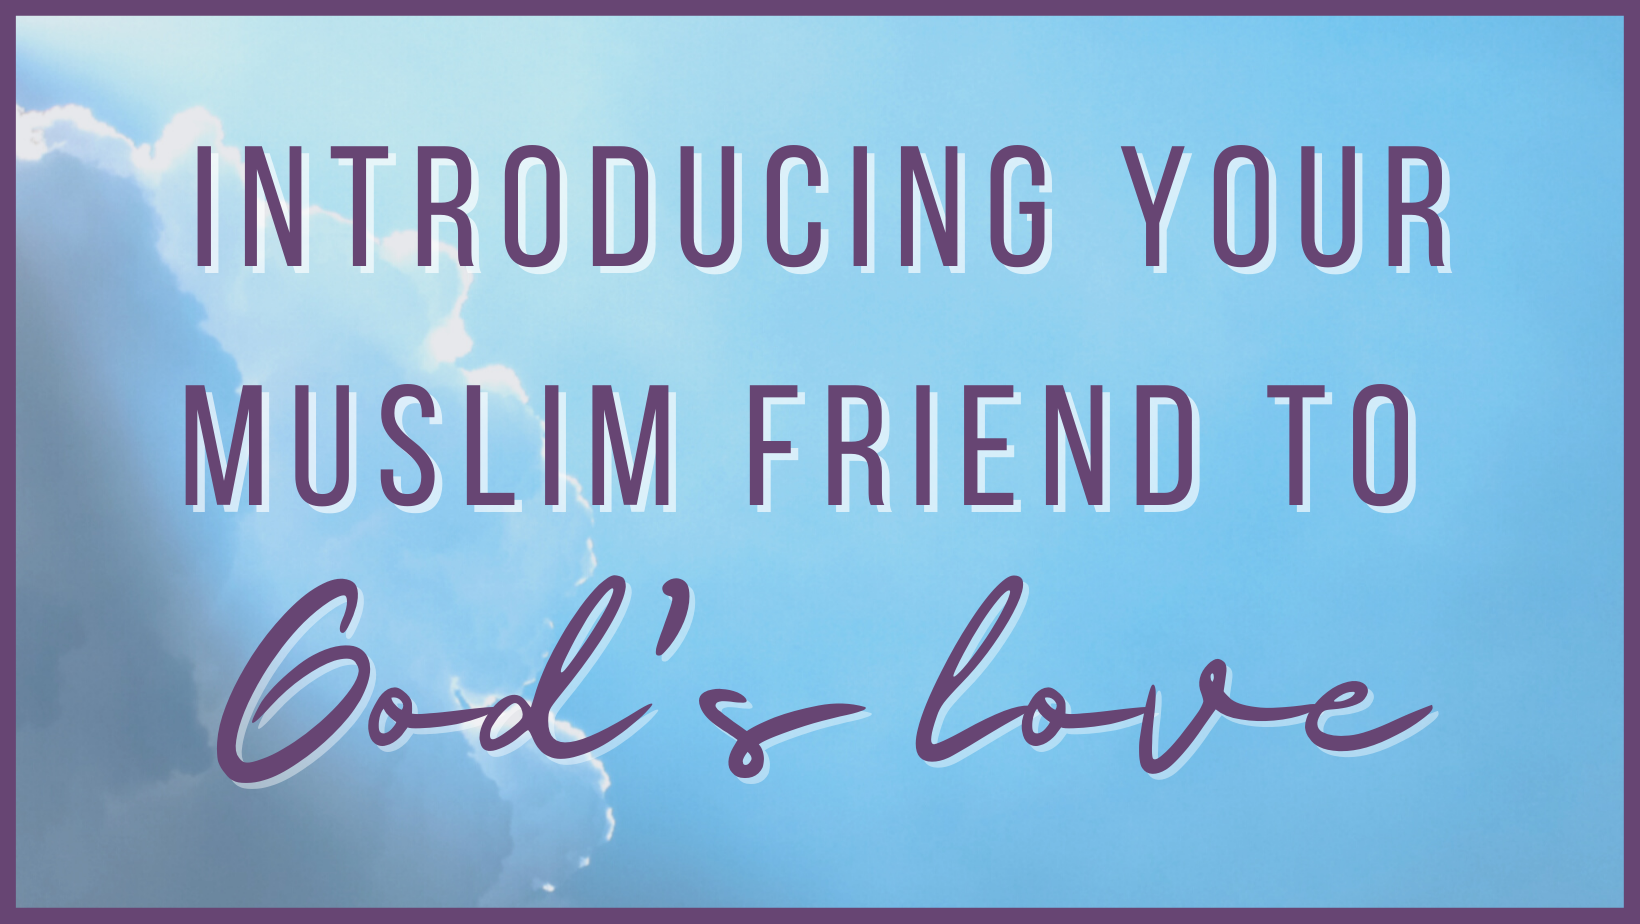 Introducing your Muslim Friend to God’s love